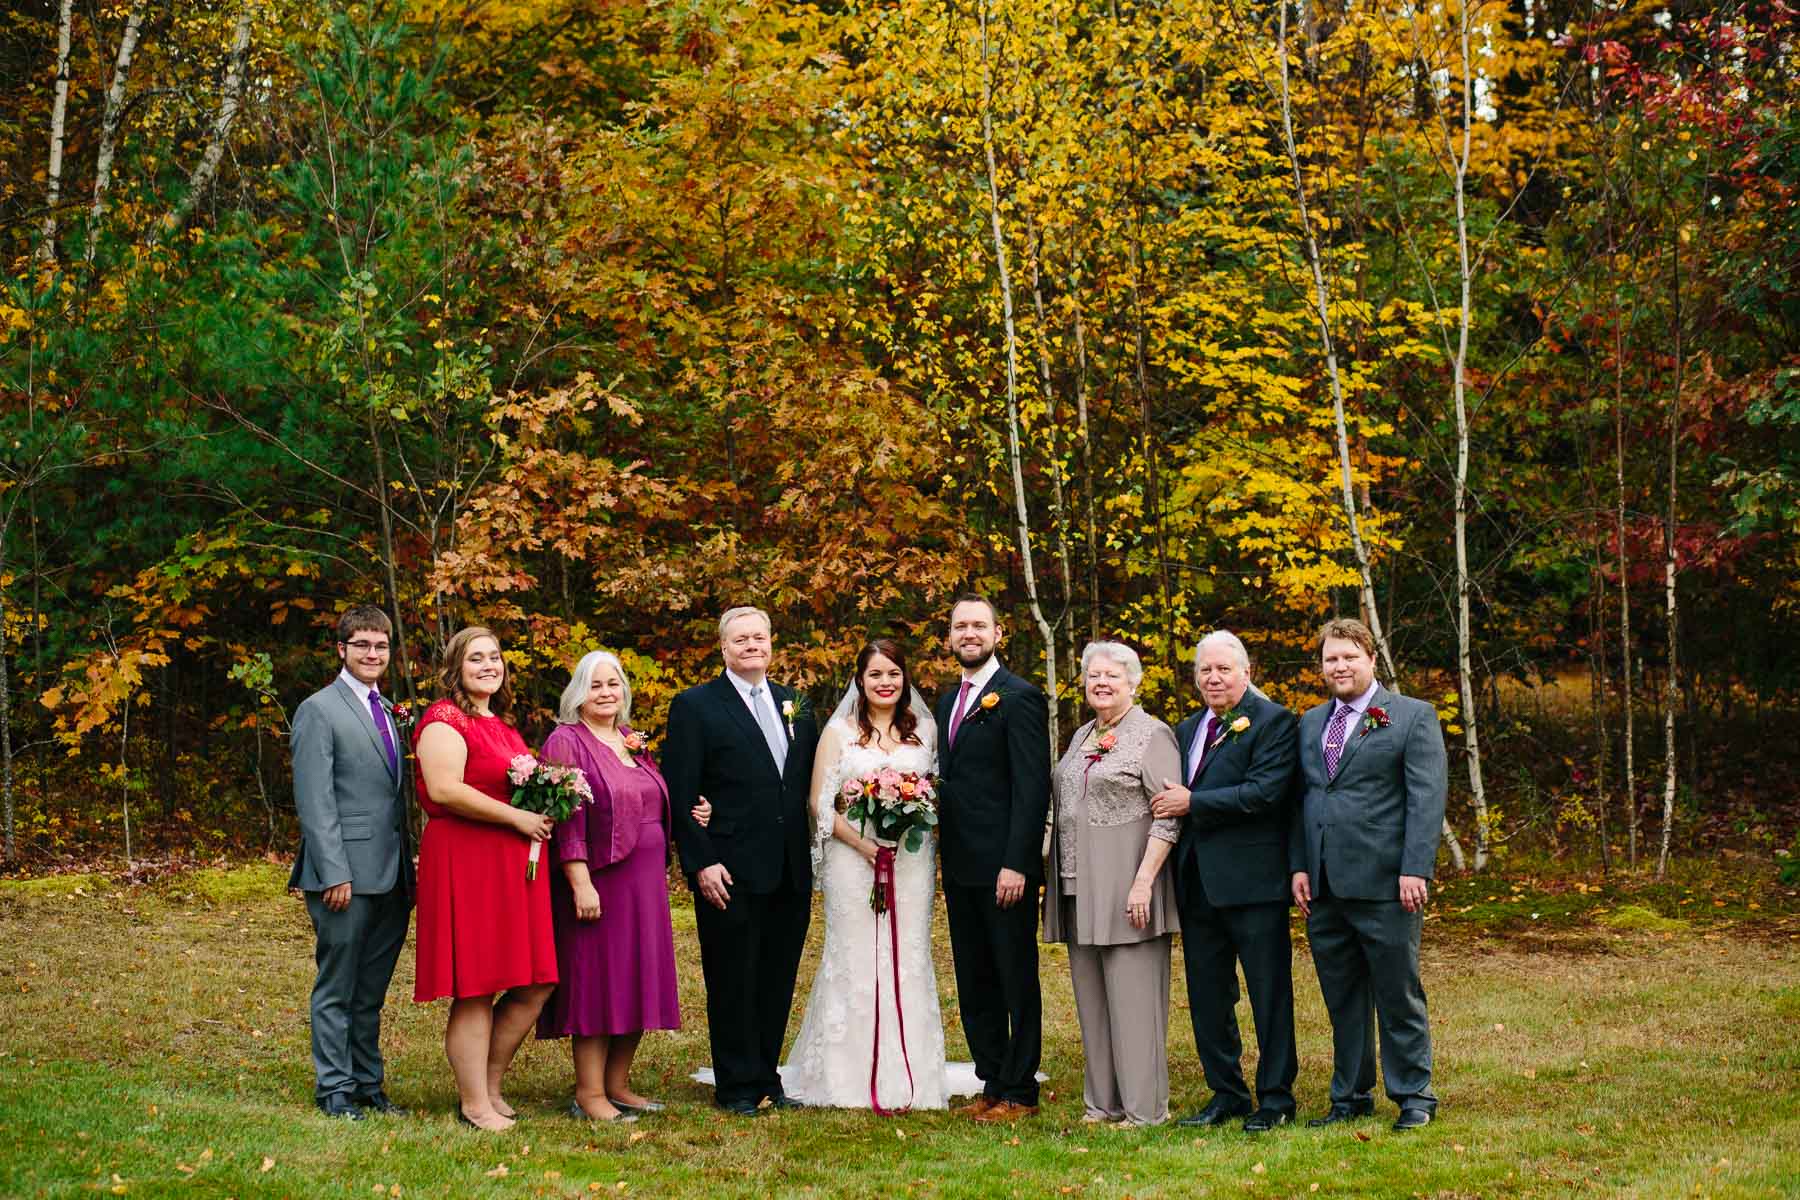 Melissa and Ben's Plymouth New Hampshire Wedding at the Greenhouse | New England wedding photographer Kelly Benvenuto